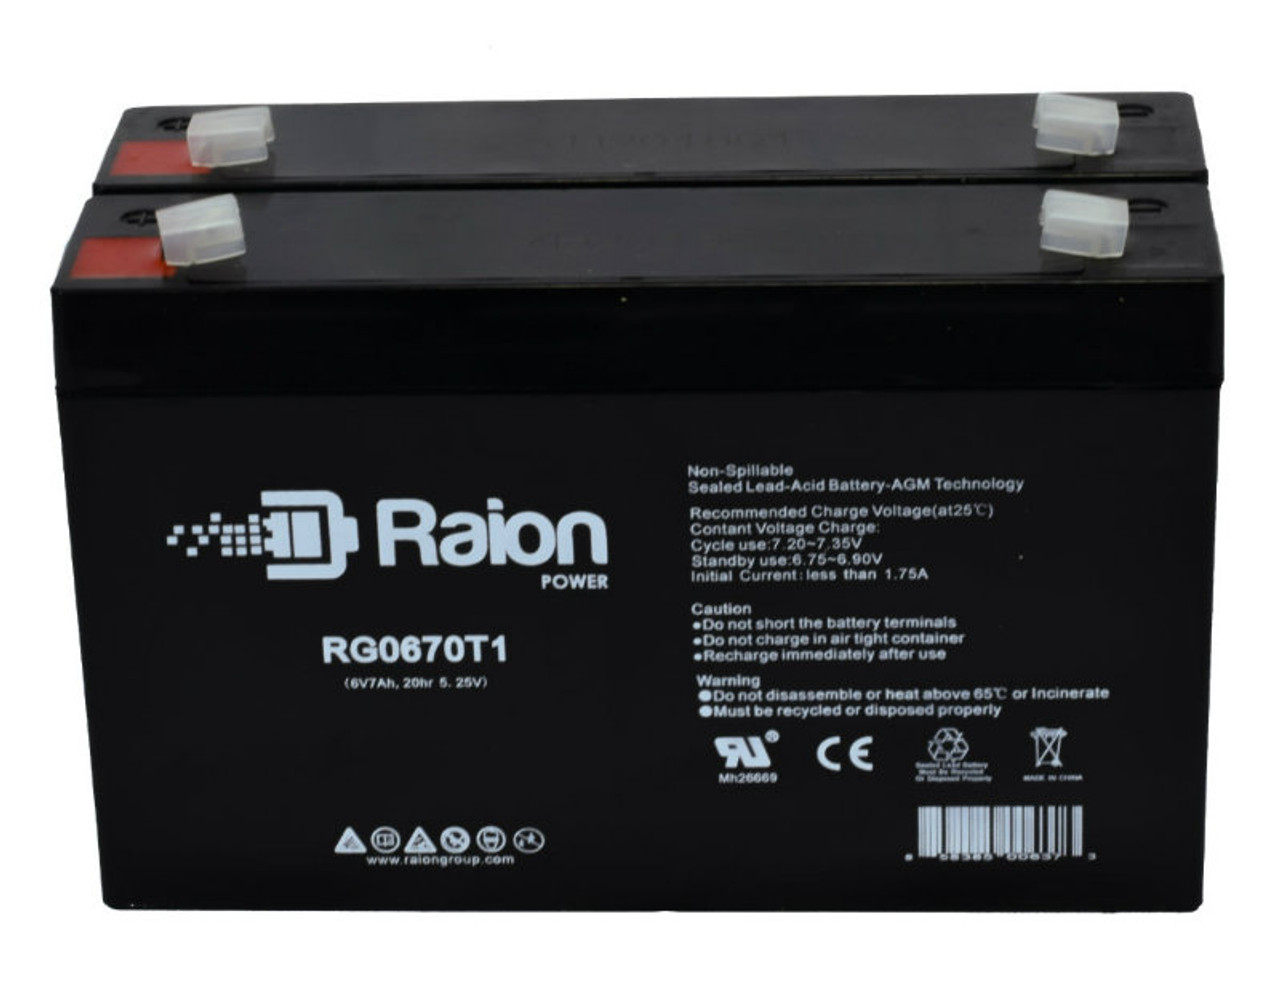 Raion Power RG0670T1 6V 7Ah Replacement Battery for Alaris Medical PC1 GEMINI INFUSION PUMP CNTRLR - 2 Pack